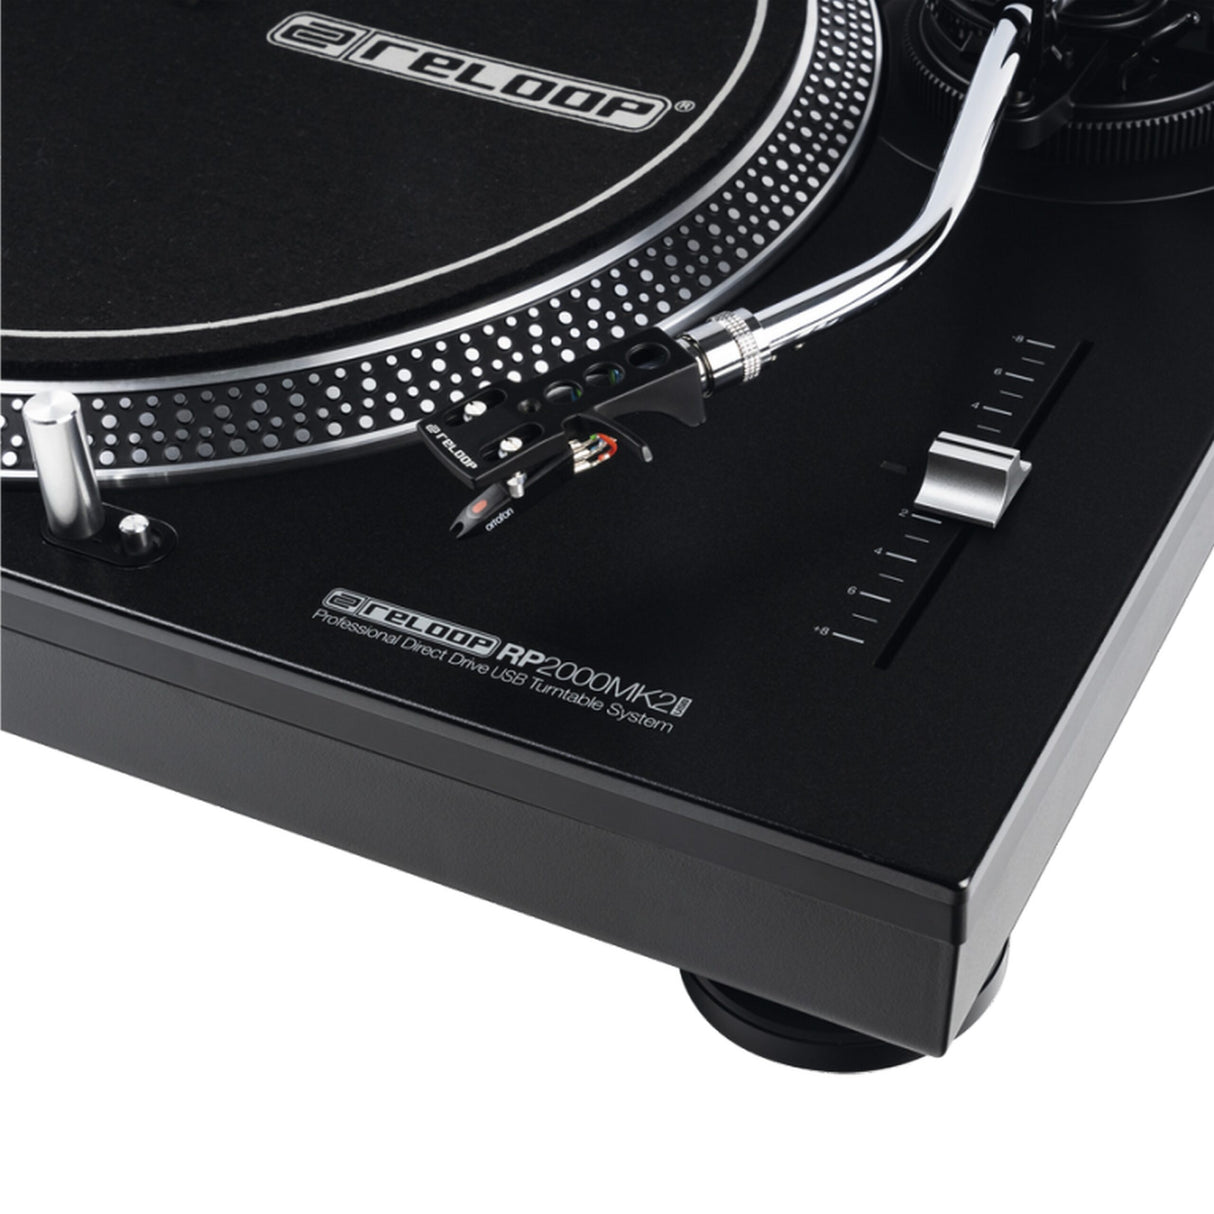 Reloop RP-2000-USB-MK2 Direct Drive USB Turntable System